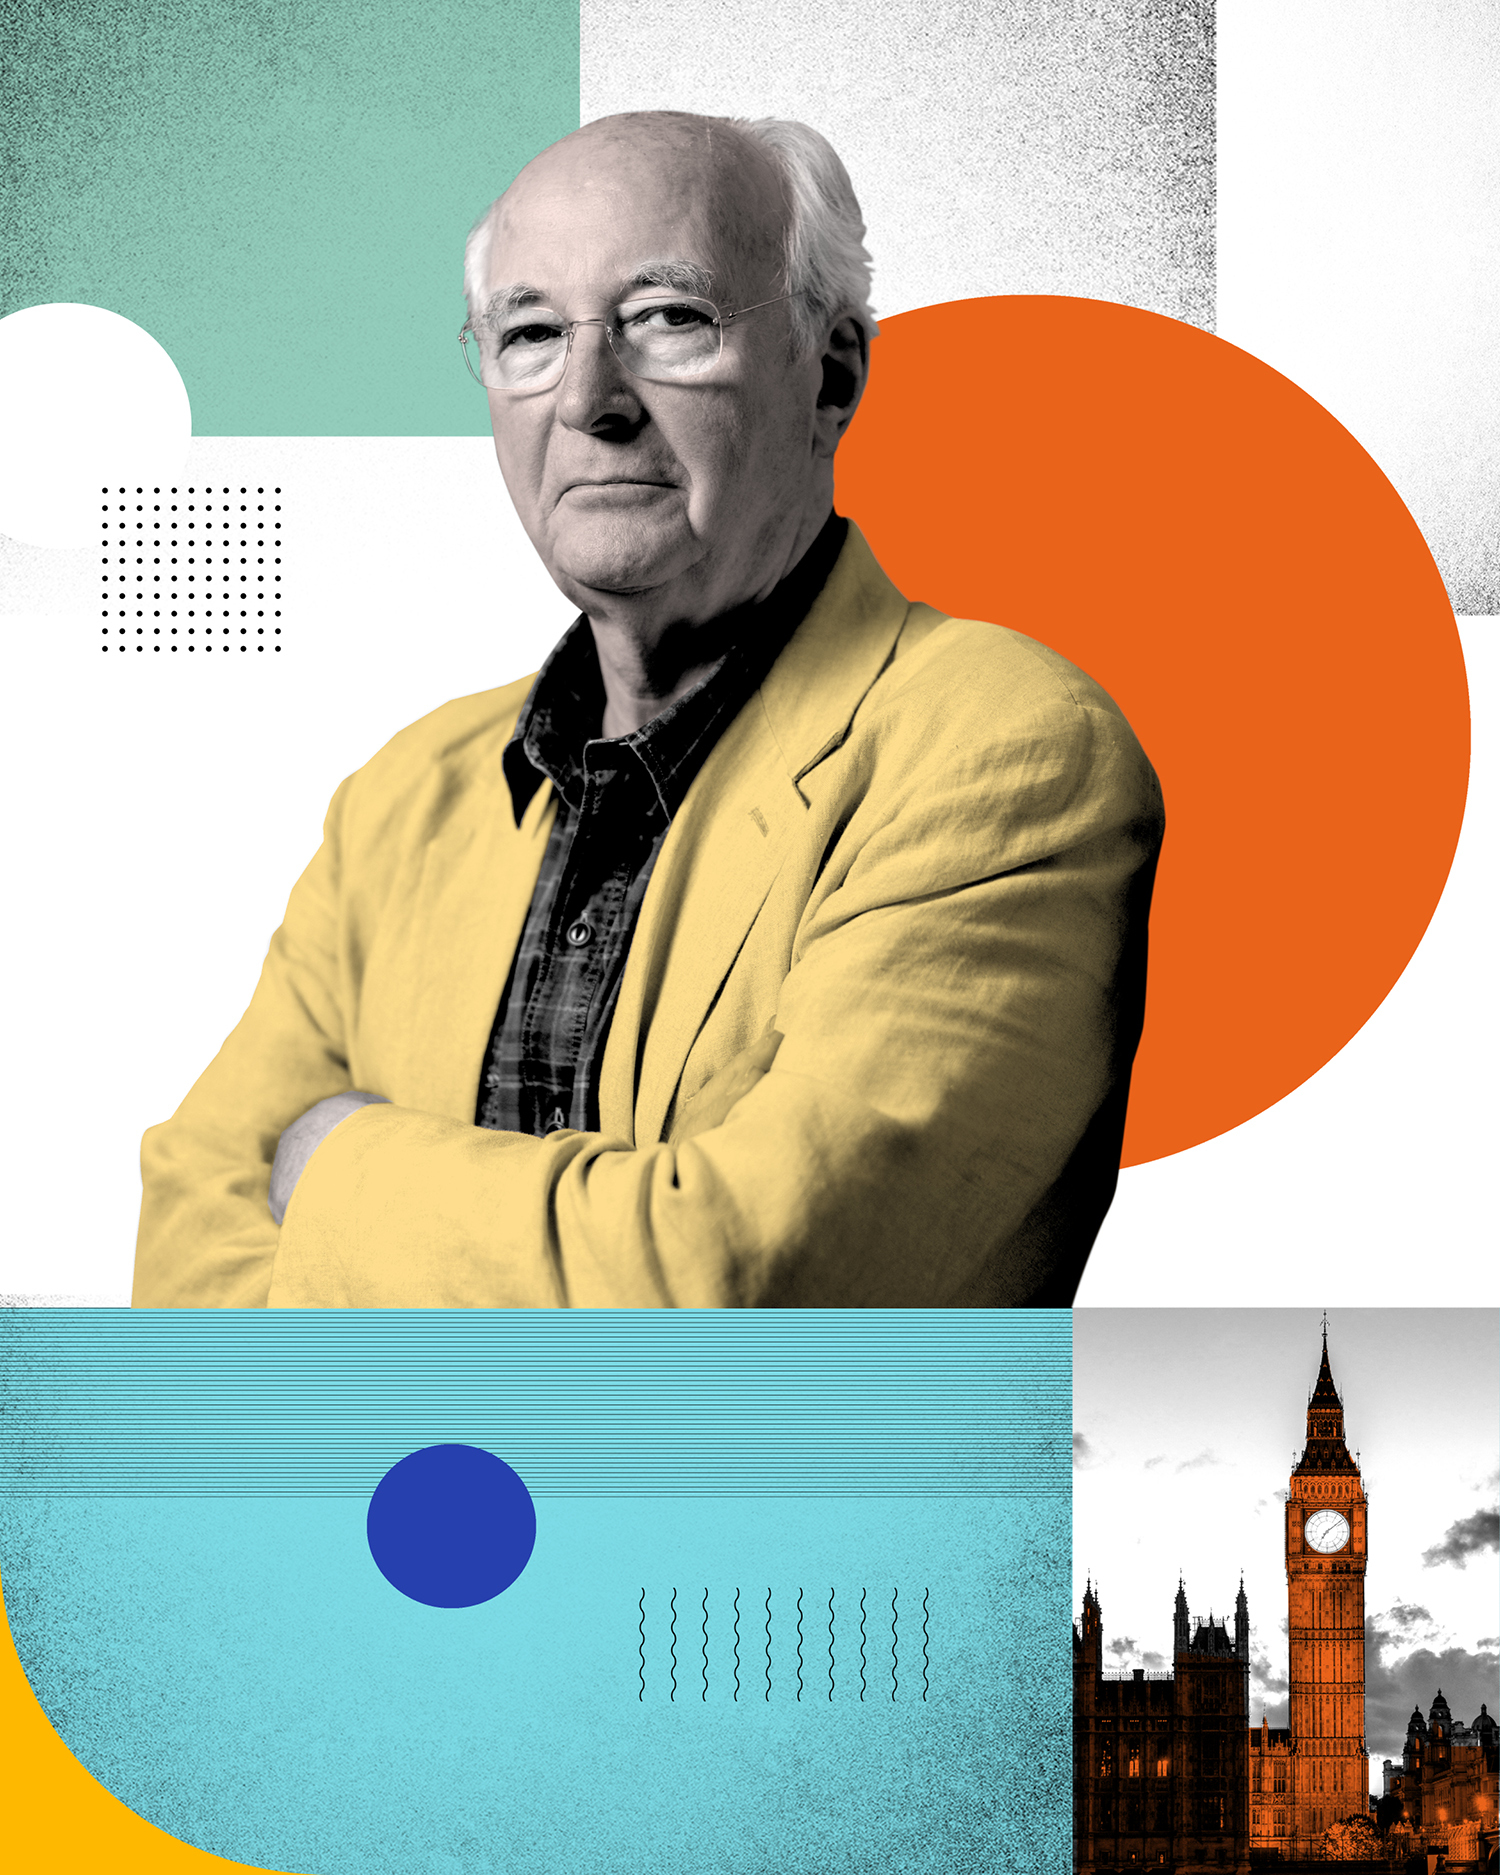 Philip Pullman perspectives